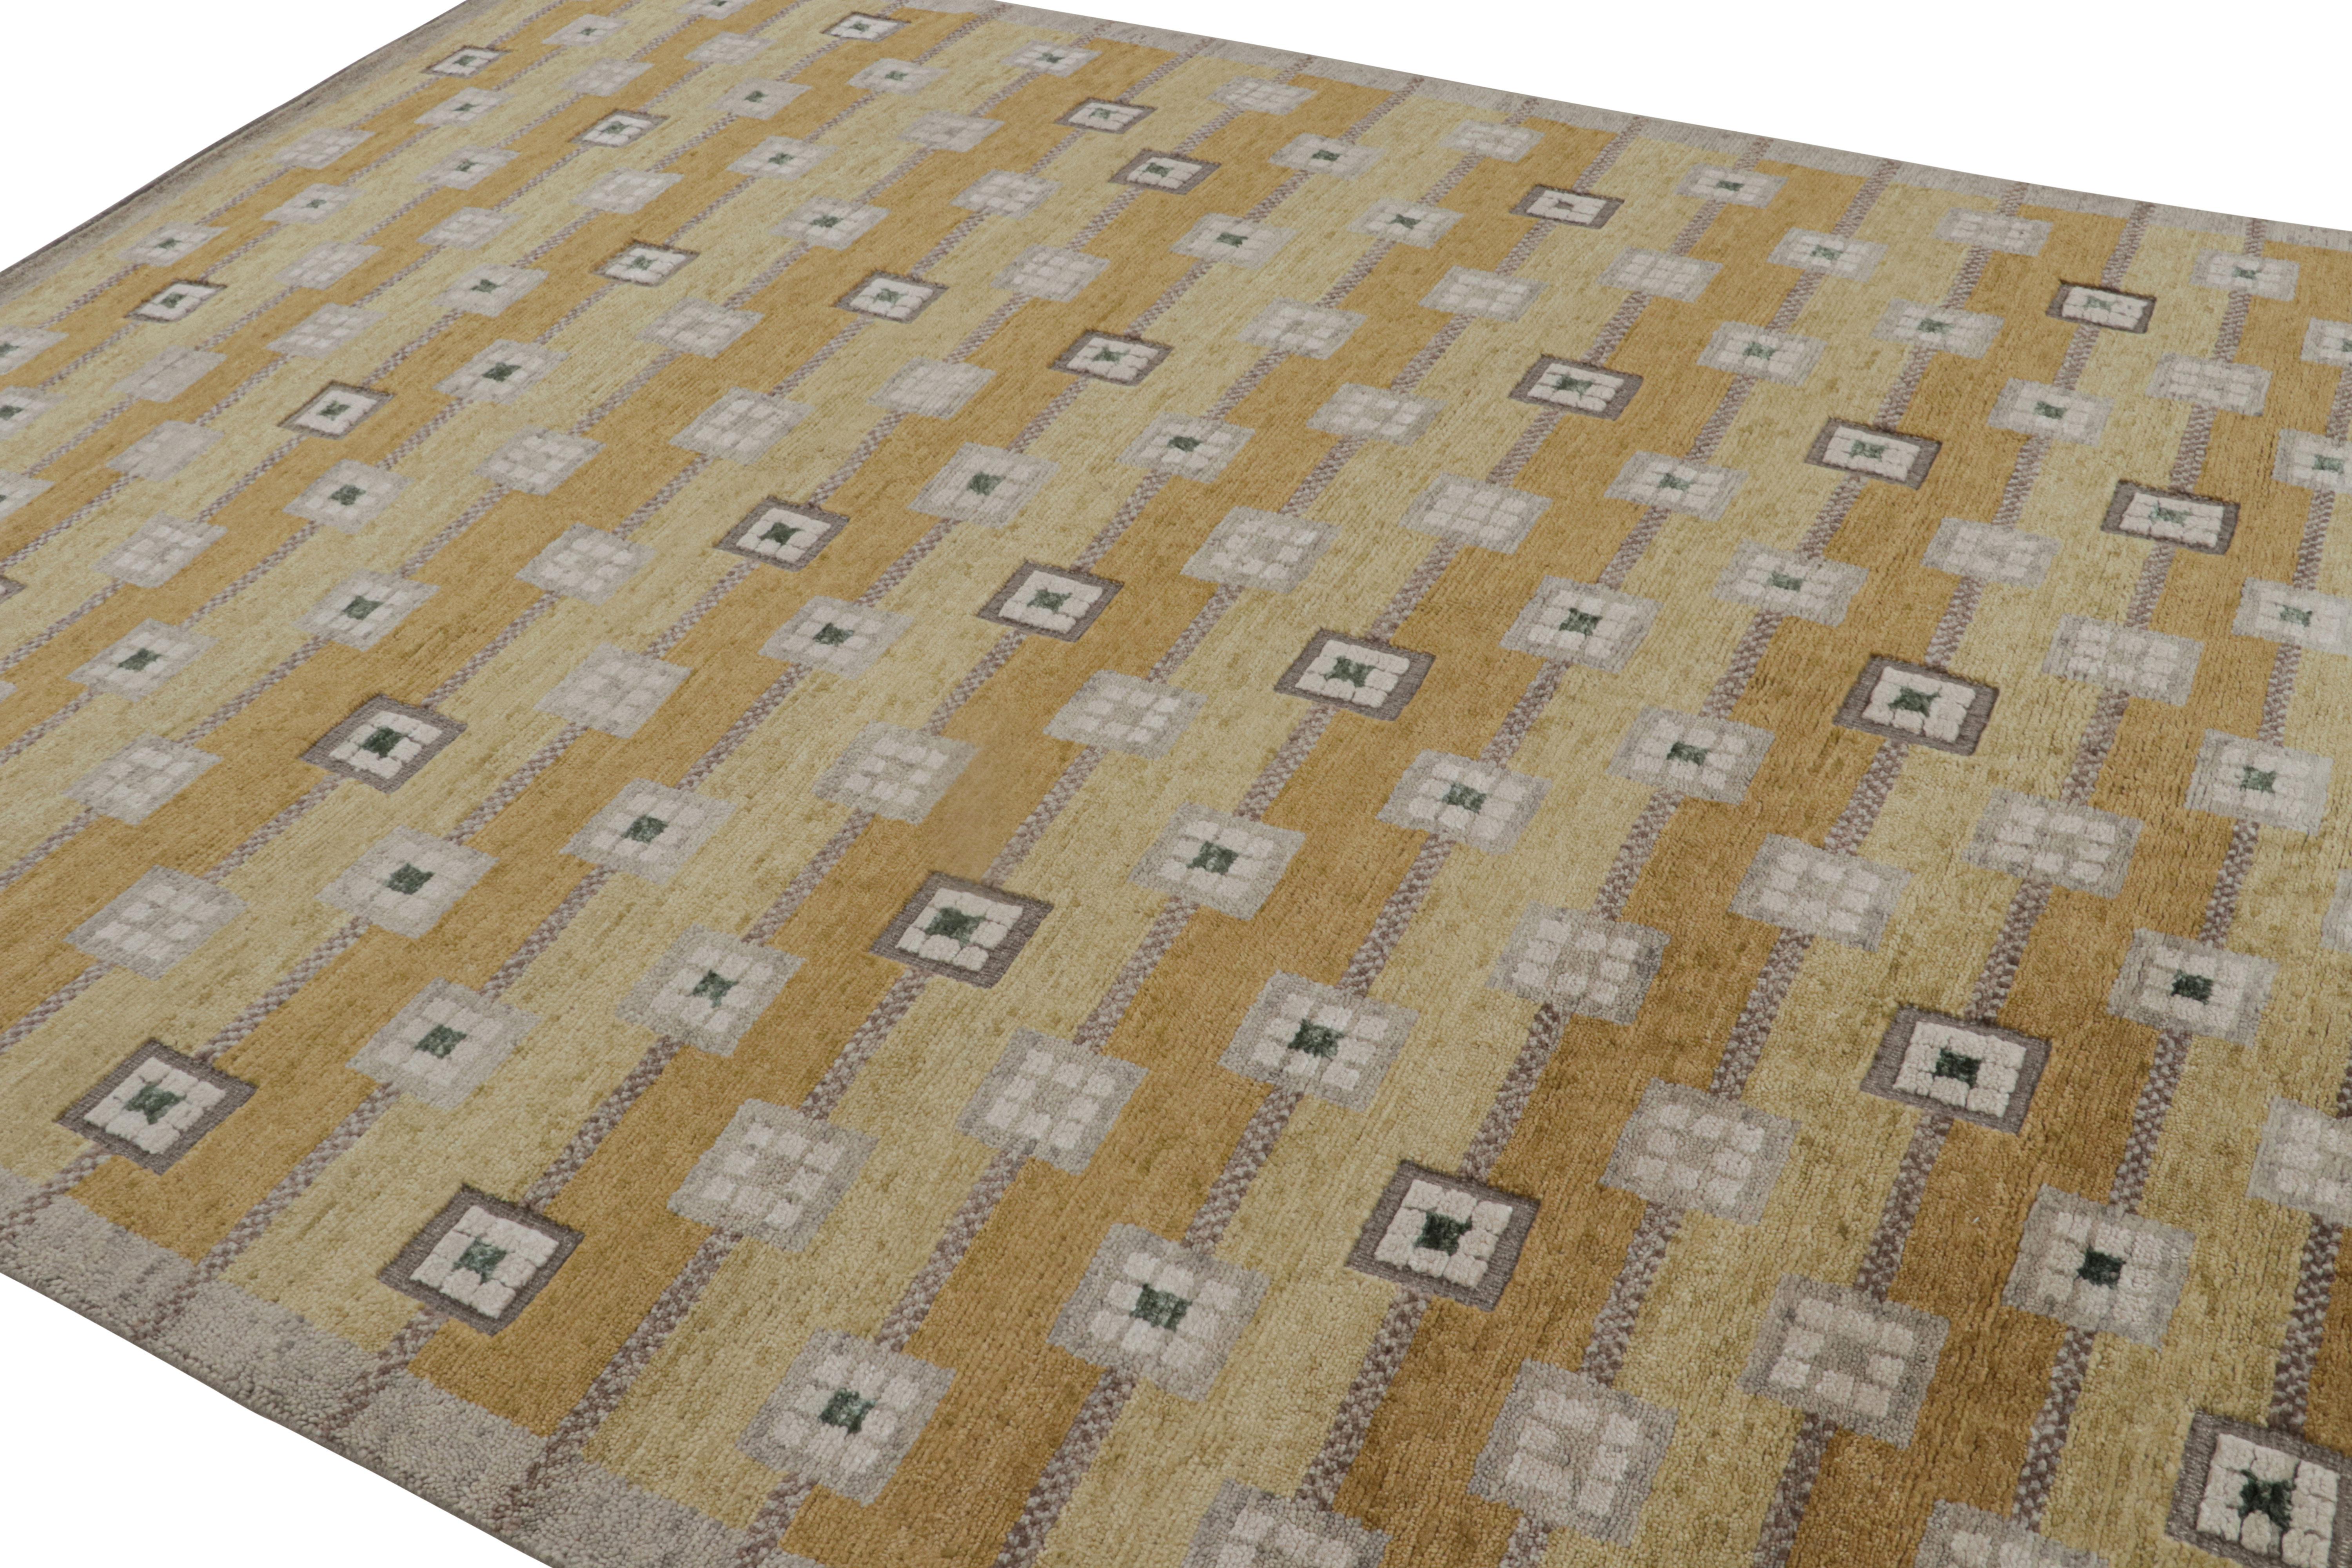 Hand-knotted in wool, this 8x10 rug is from the “High” line of our pile rugs in Scandinavian collection.

On the design: 
The photos represent a recently sold rug with gold, beige-brown and green geometric patterns married to the high-low texture